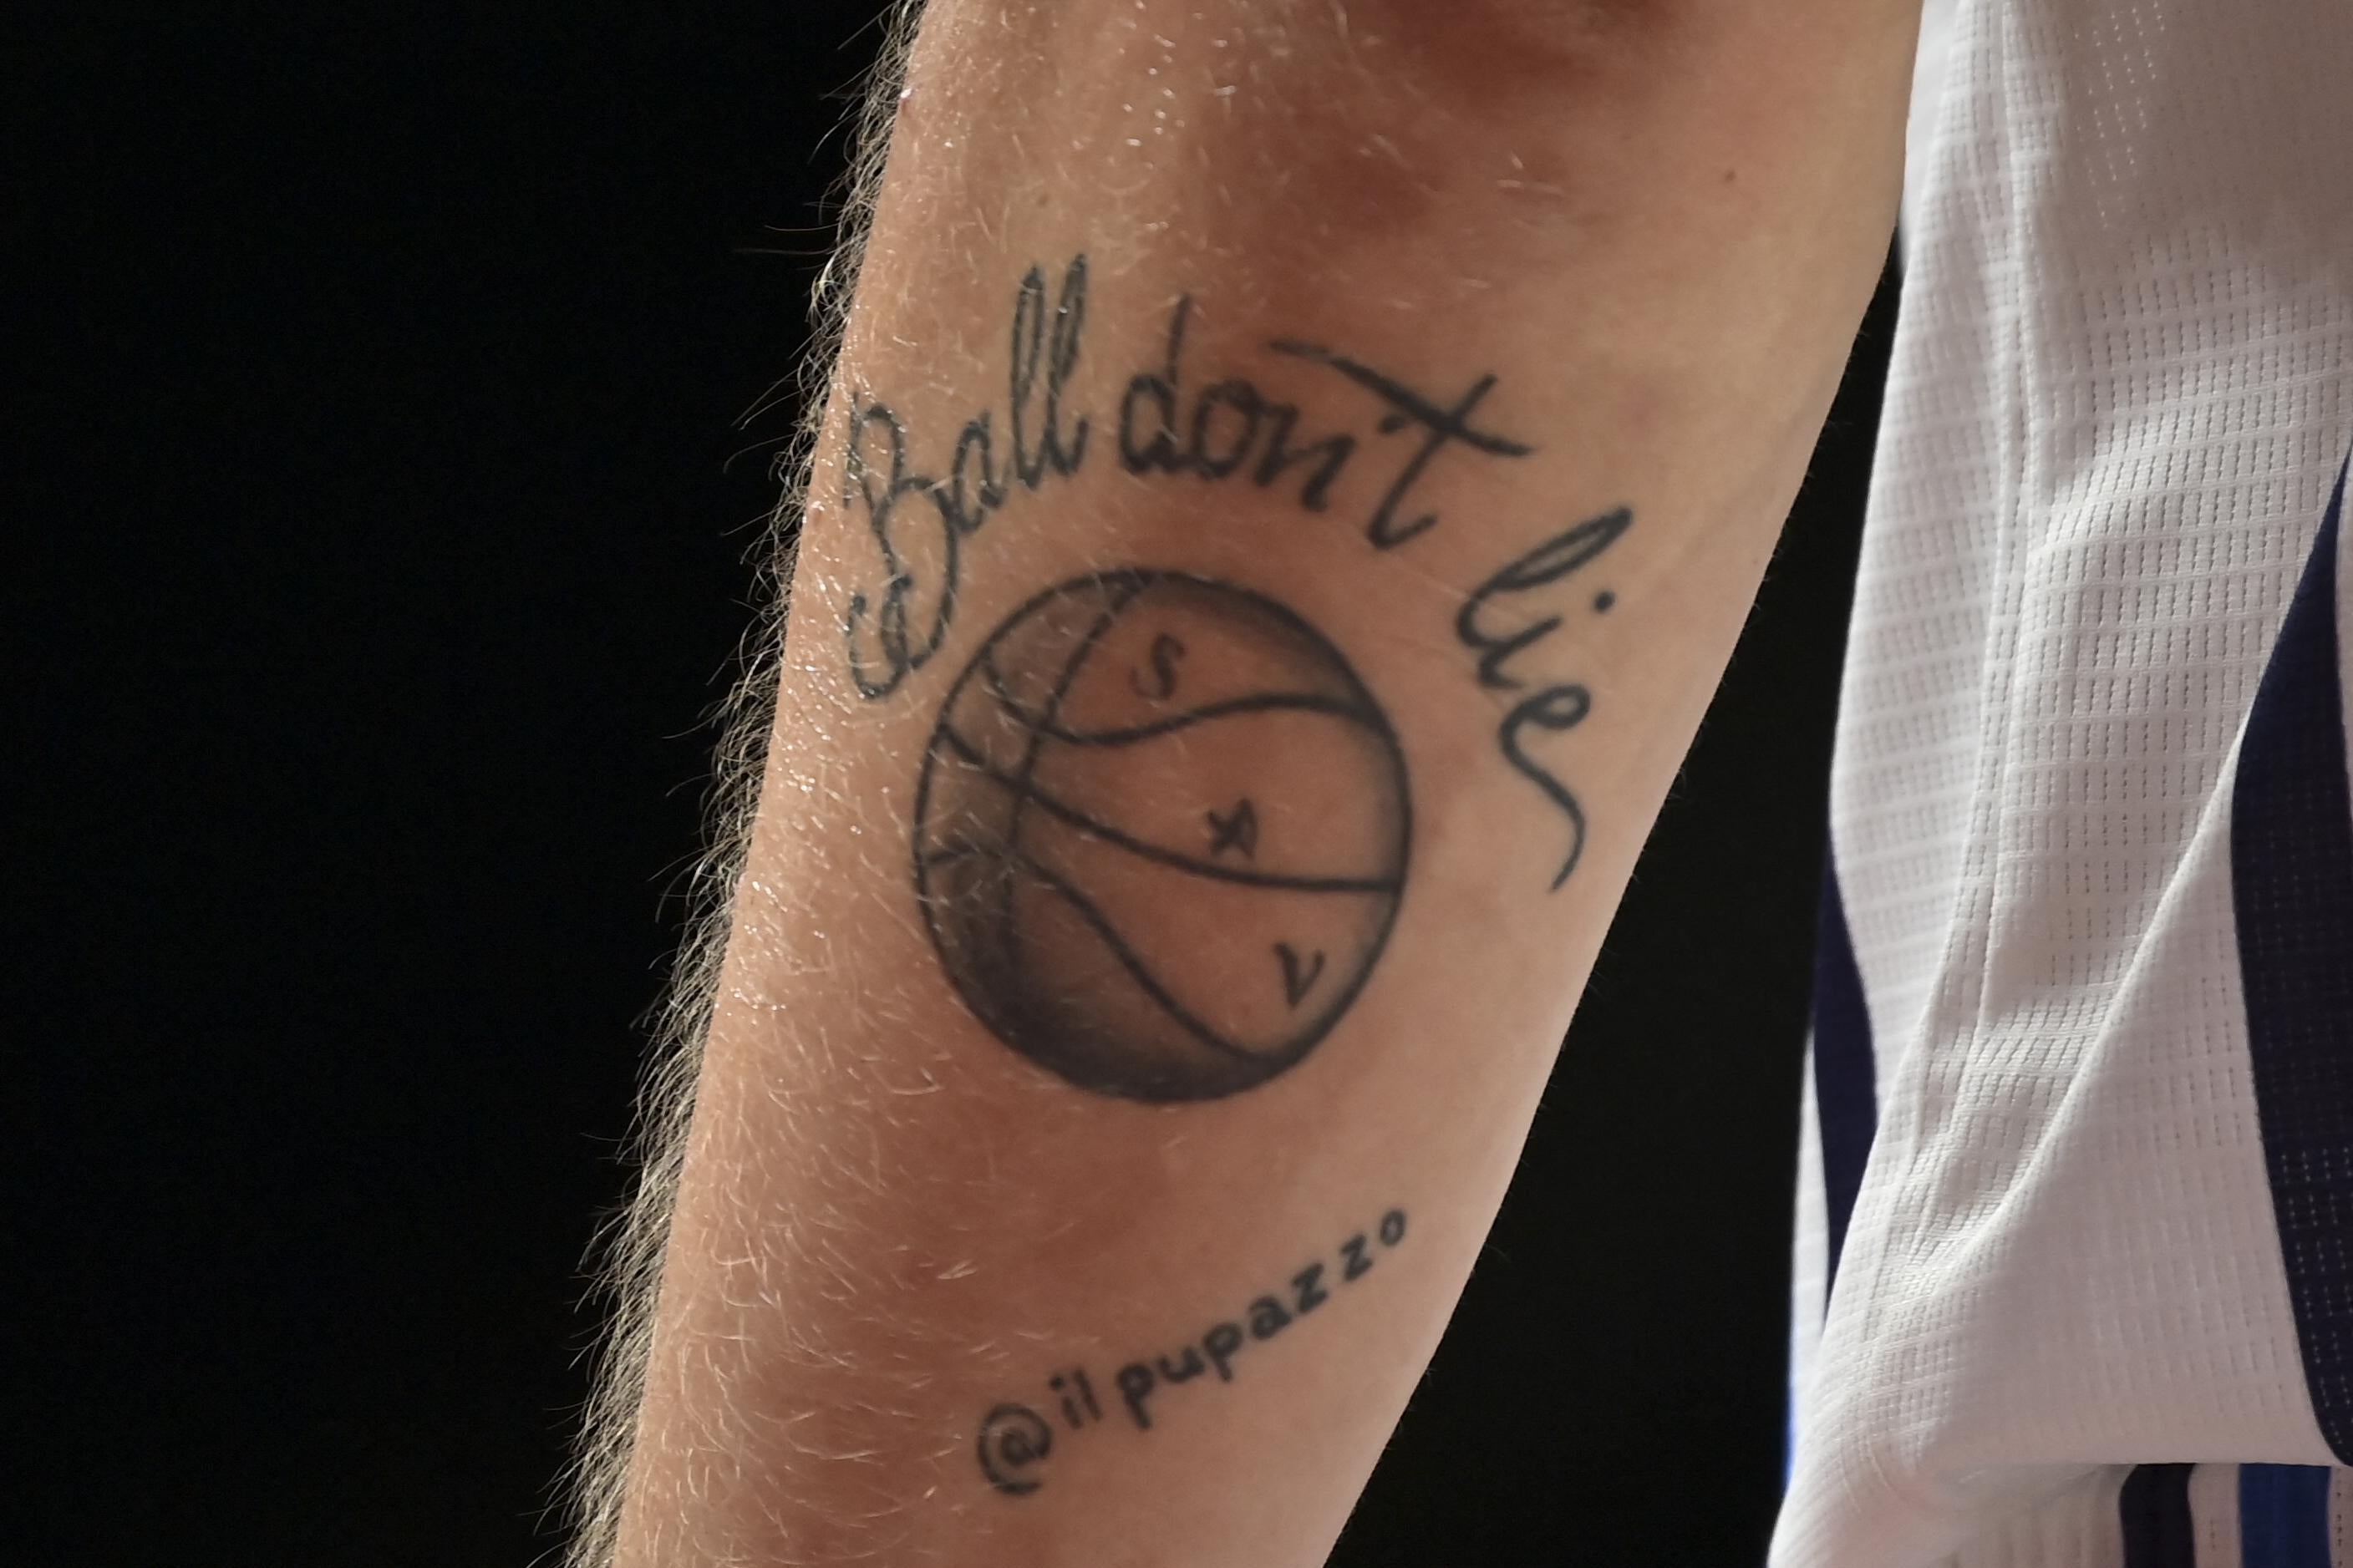 A tattoo reading "Ball don't lie" over a basketball with @ilpuppuzzo scrawled underneath it